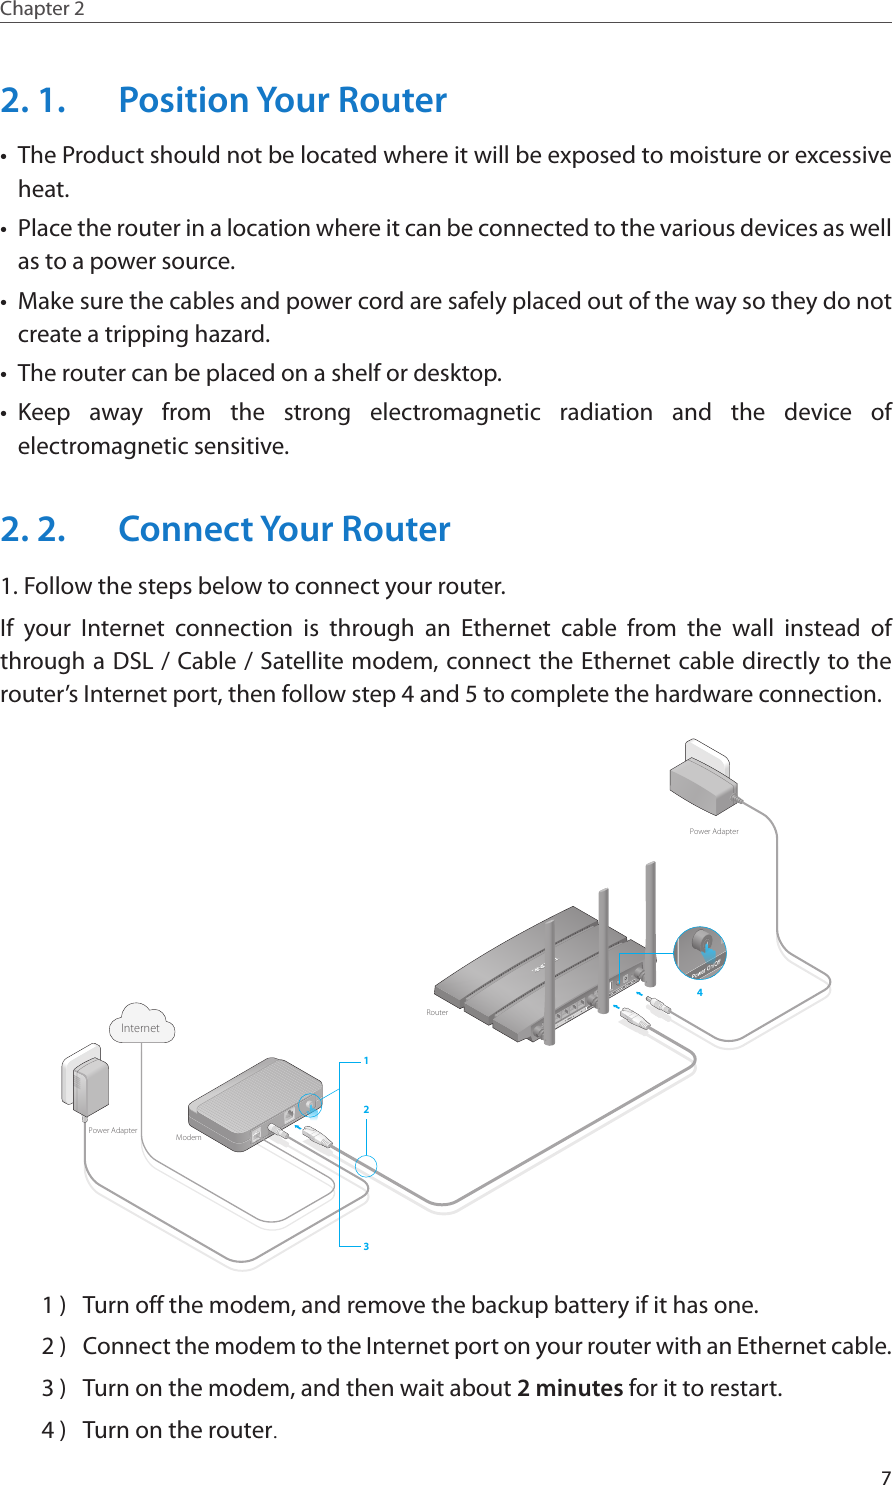 7Chapter 2  2. 1.  Position Your Router•  The Product should not be located where it will be exposed to moisture or excessive heat.•  Place the router in a location where it can be connected to the various devices as well as to a power source.•  Make sure the cables and power cord are safely placed out of the way so they do not create a tripping hazard.•  The router can be placed on a shelf or desktop.•  Keep away from the strong electromagnetic radiation and the device of electromagnetic sensitive.2. 2.  Connect Your Router1. Follow the steps below to connect your router.If your Internet connection is through an Ethernet cable from the wall instead of through a DSL / Cable / Satellite modem, connect the Ethernet cable directly to the router’s Internet port, then follow step 4 and 5 to complete the hardware connection.4WPS132ModemRouterInternetPower AdapterPower Adapter1 )  Turn off the modem, and remove the backup battery if it has one.2 )  Connect the modem to the Internet port on your router with an Ethernet cable.3 )  Turn on the modem, and then wait about 2 minutes for it to restart.4 )  Turn on the router.